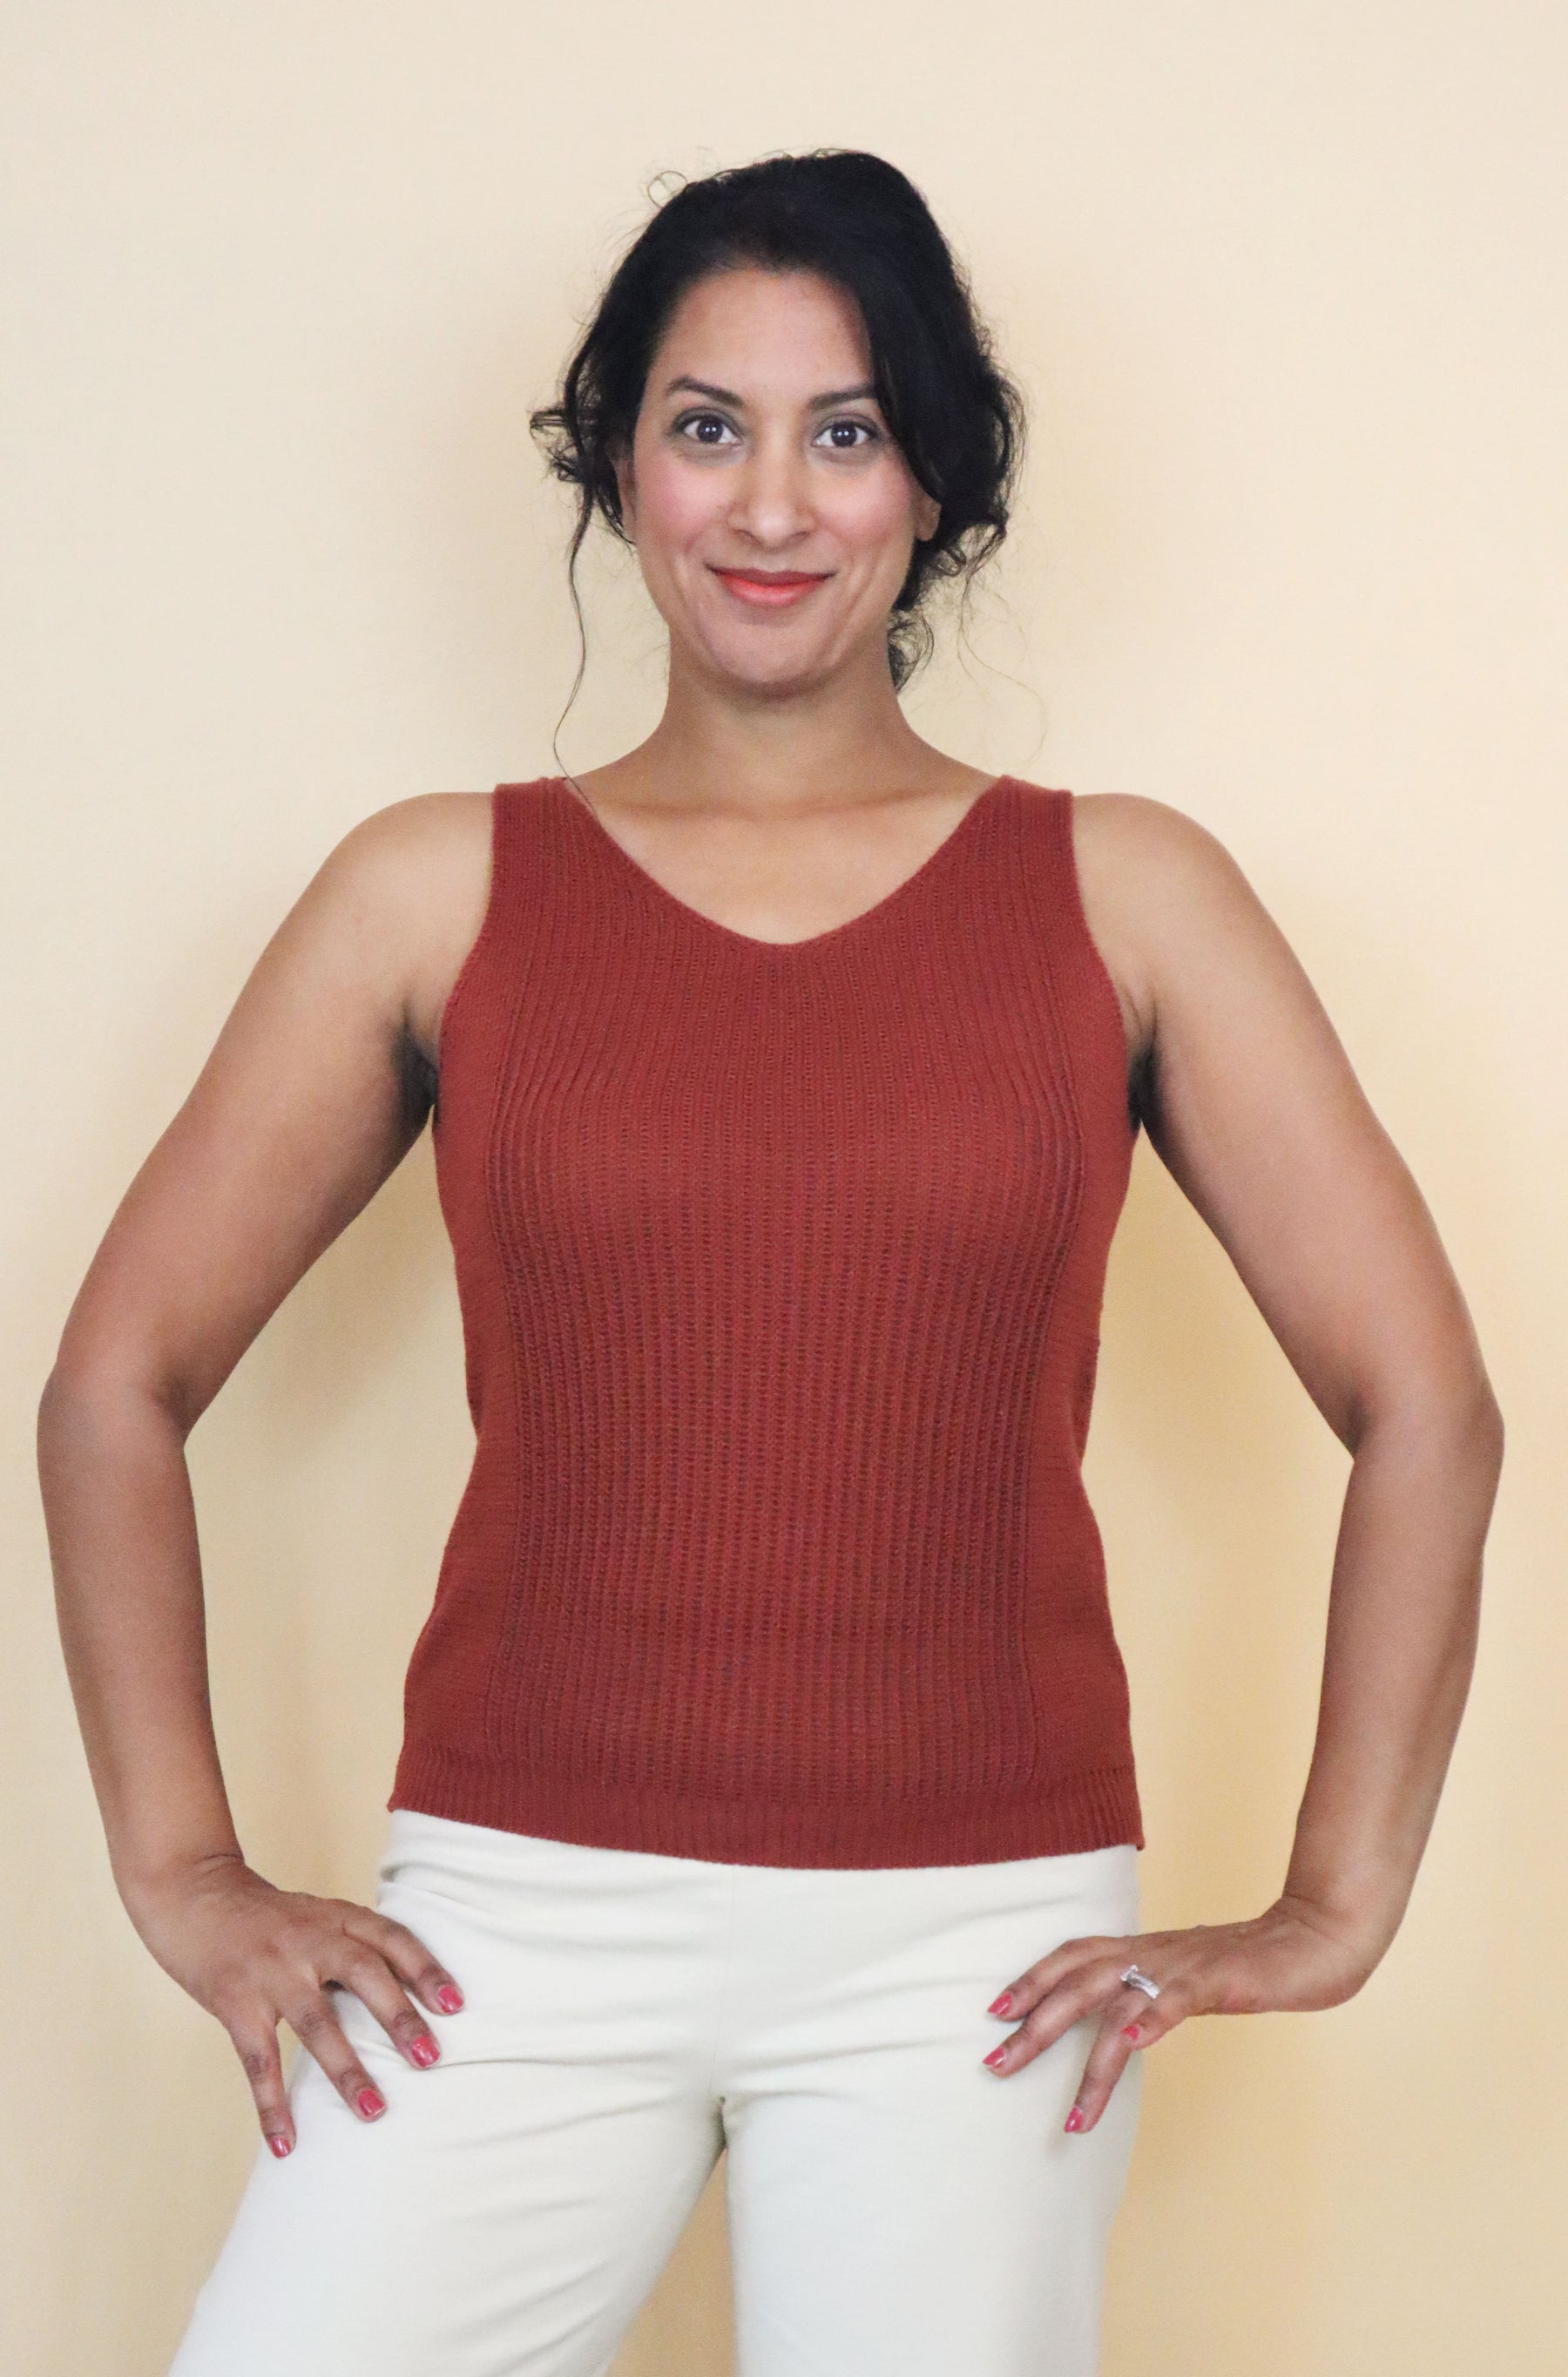  Woman's knit sweater tank made of organic cotton cashmere blend in rust cinnamon brown